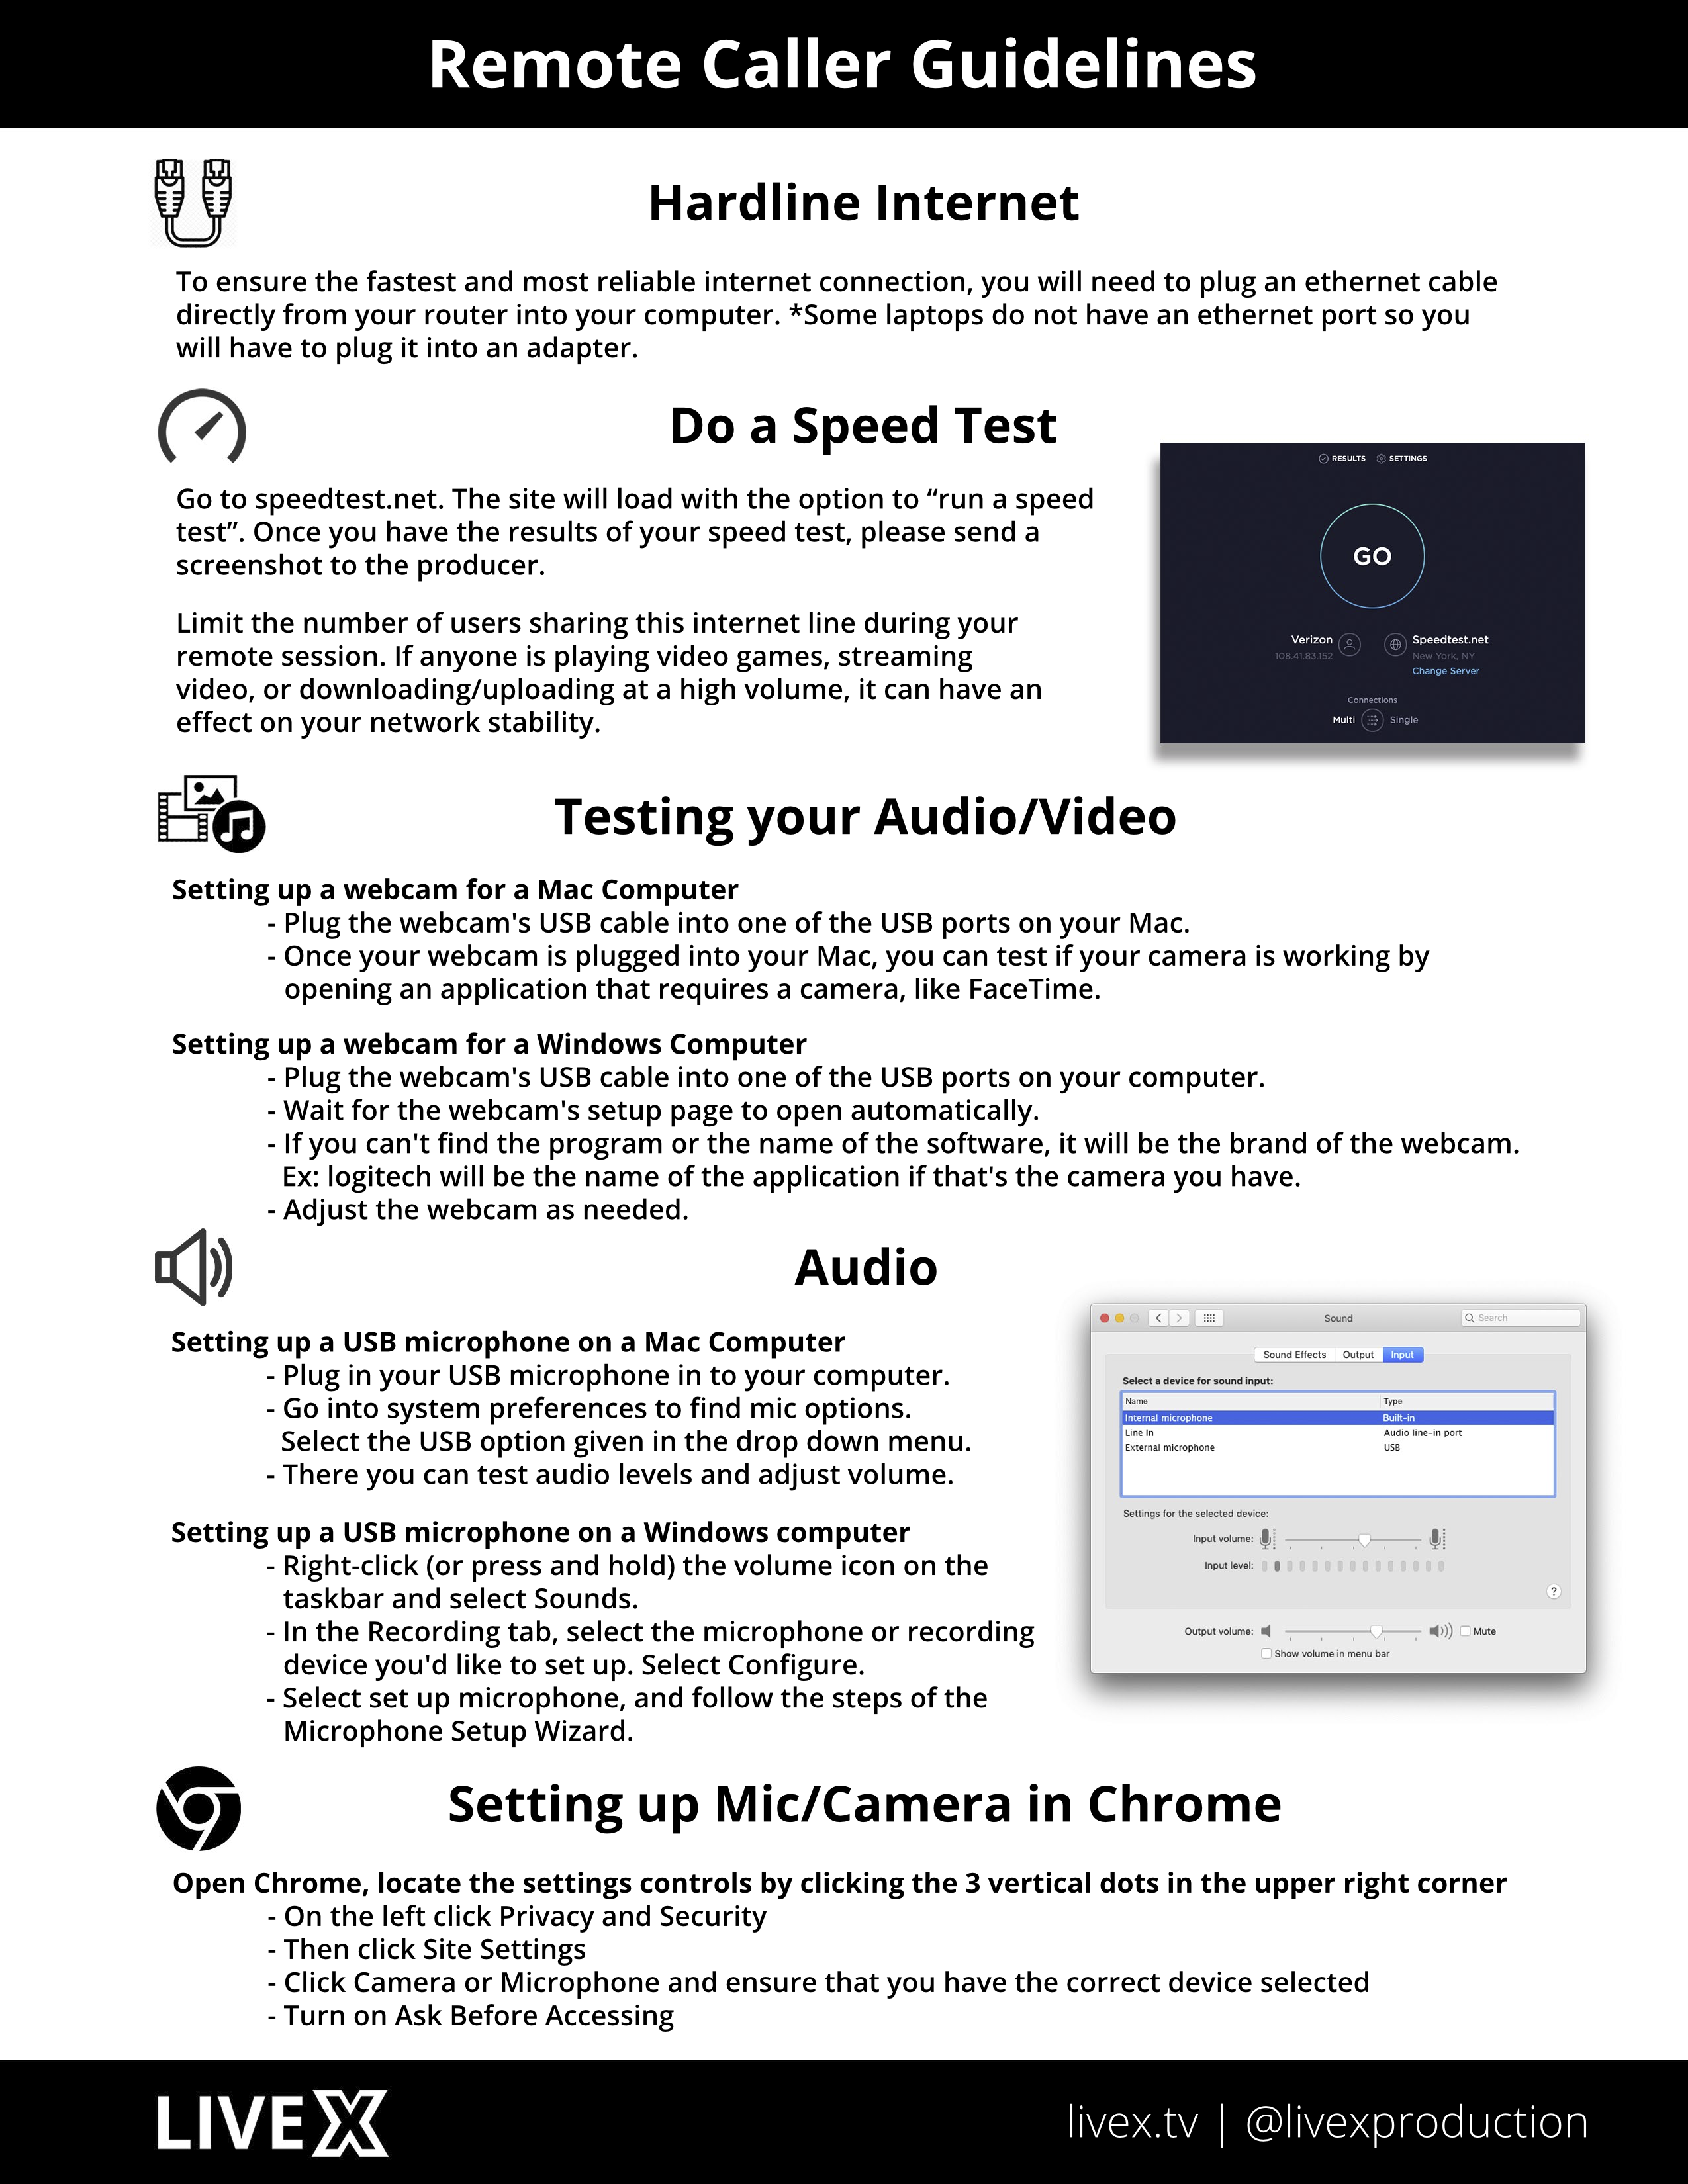 LiveX_Video_Call__Guide_2020.png